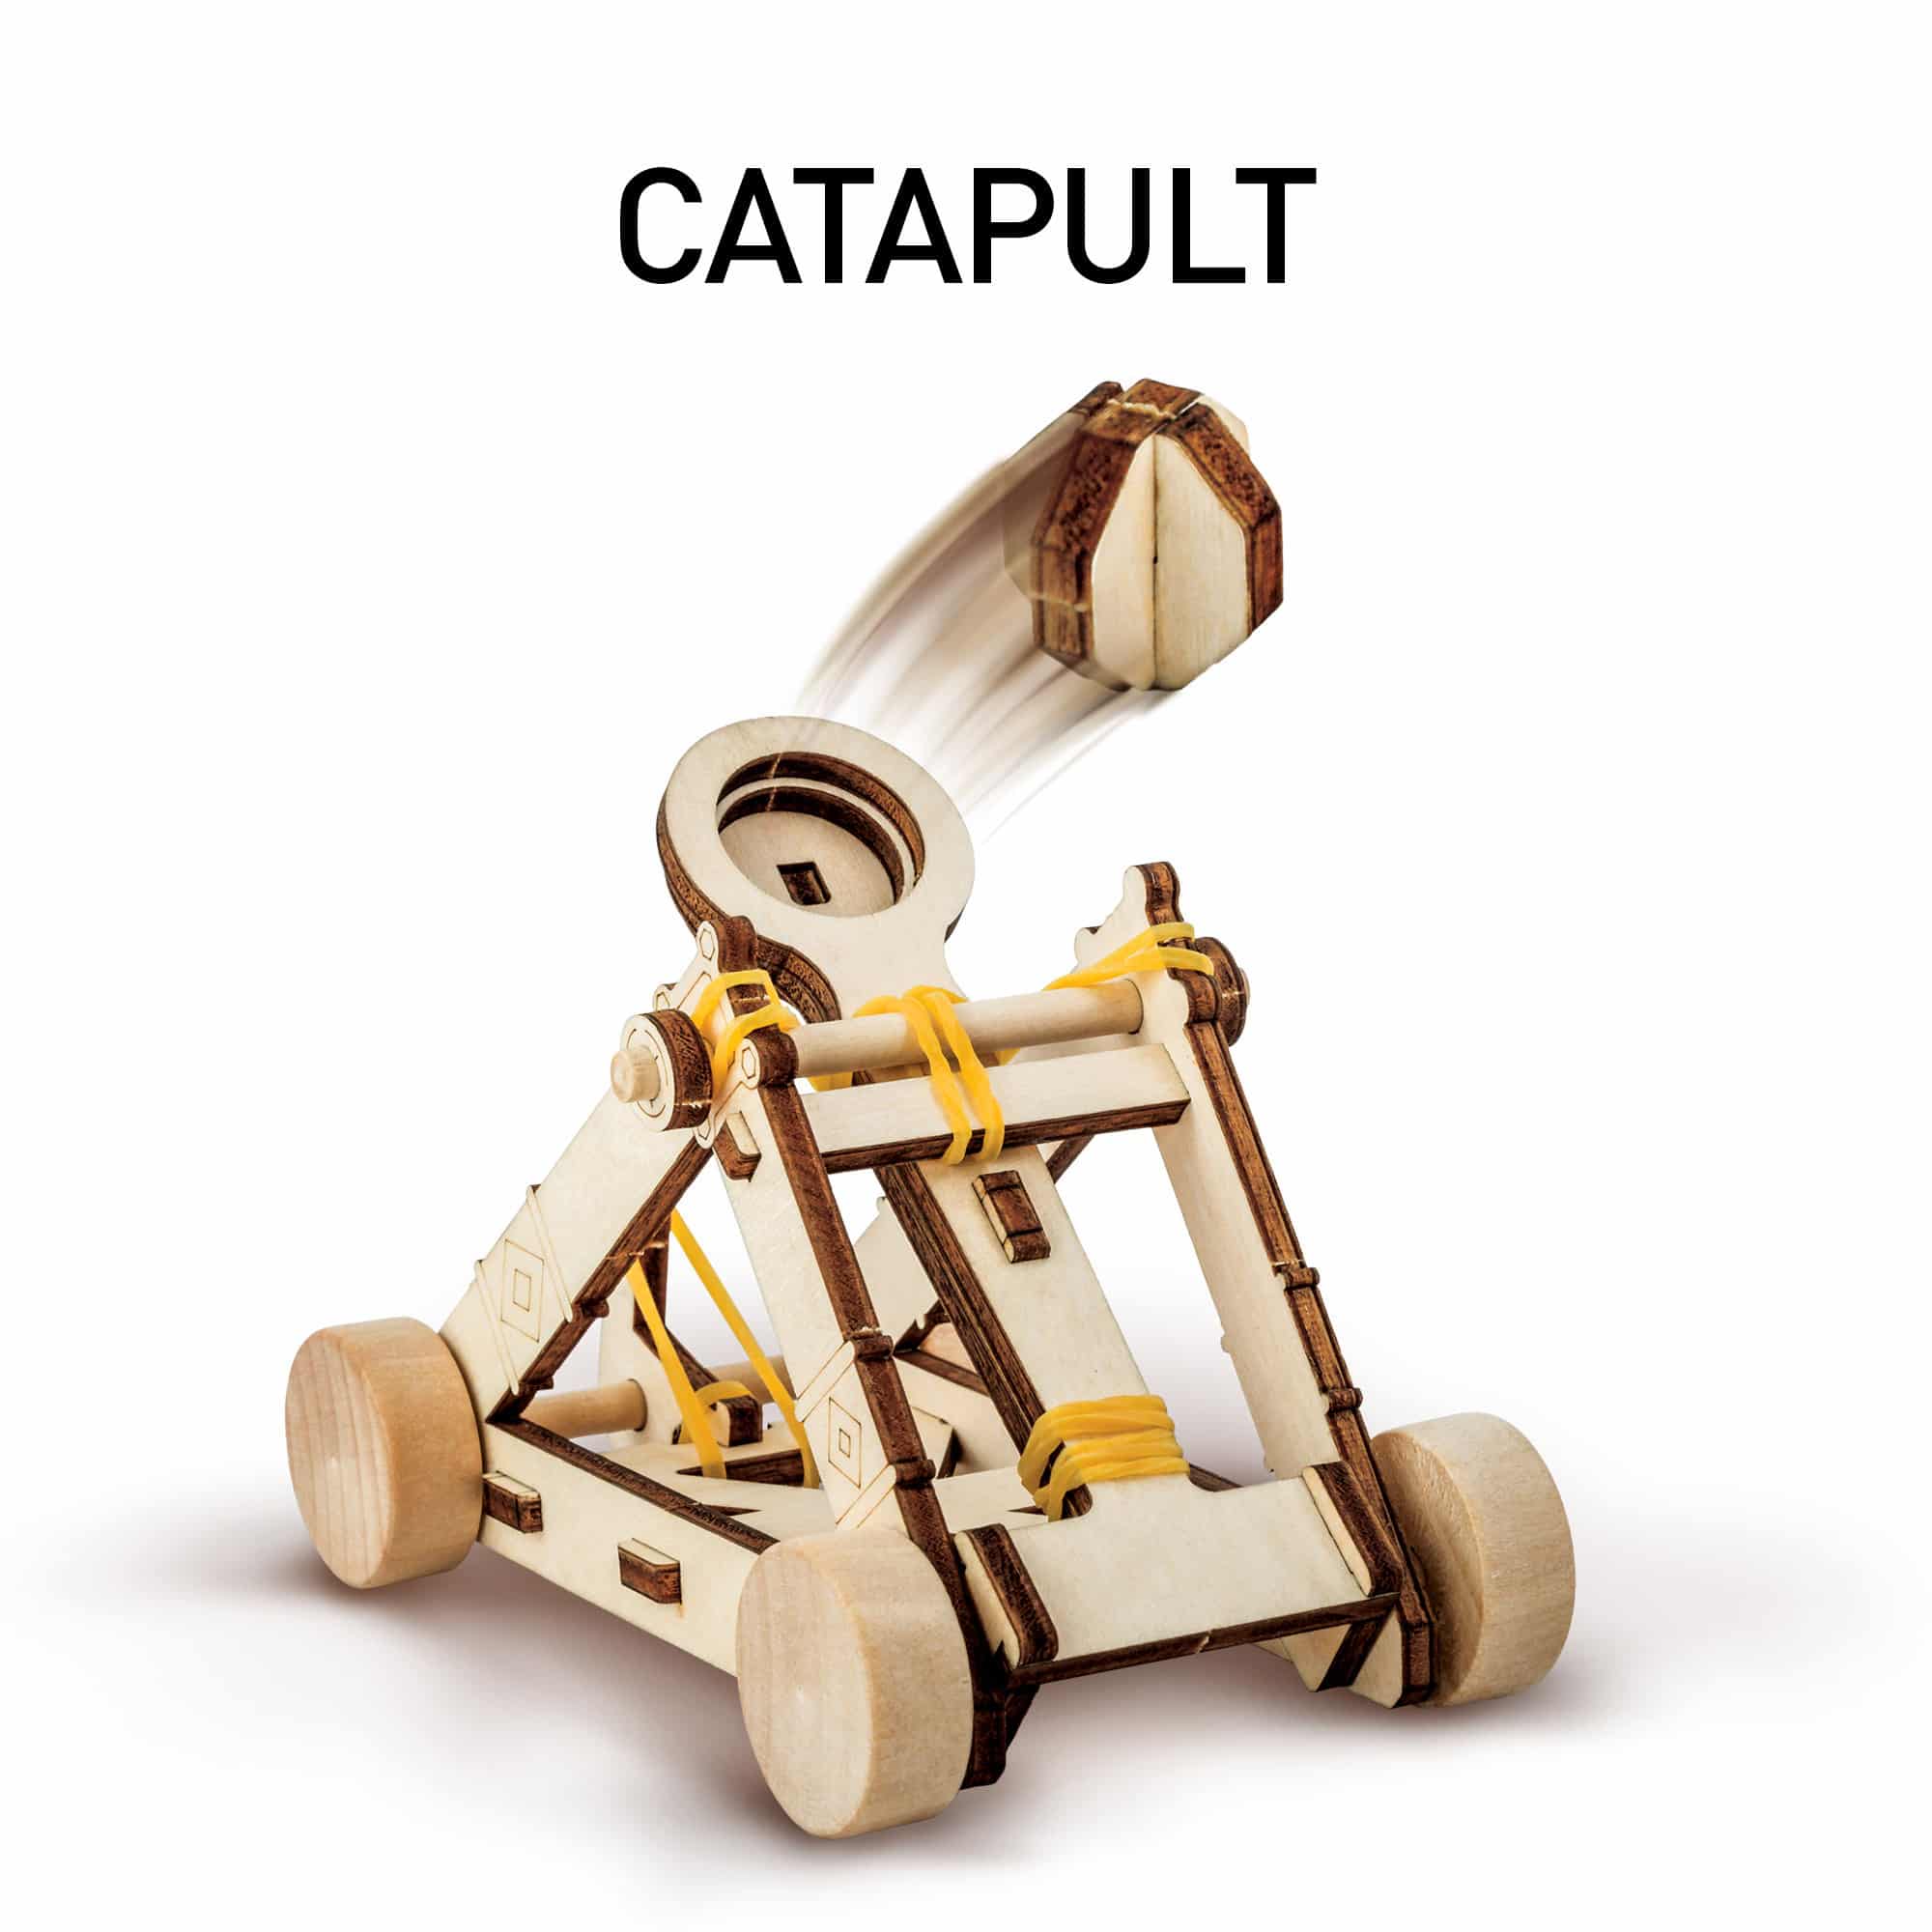 National Geographic - Da Vinci's Inventions - Catapult